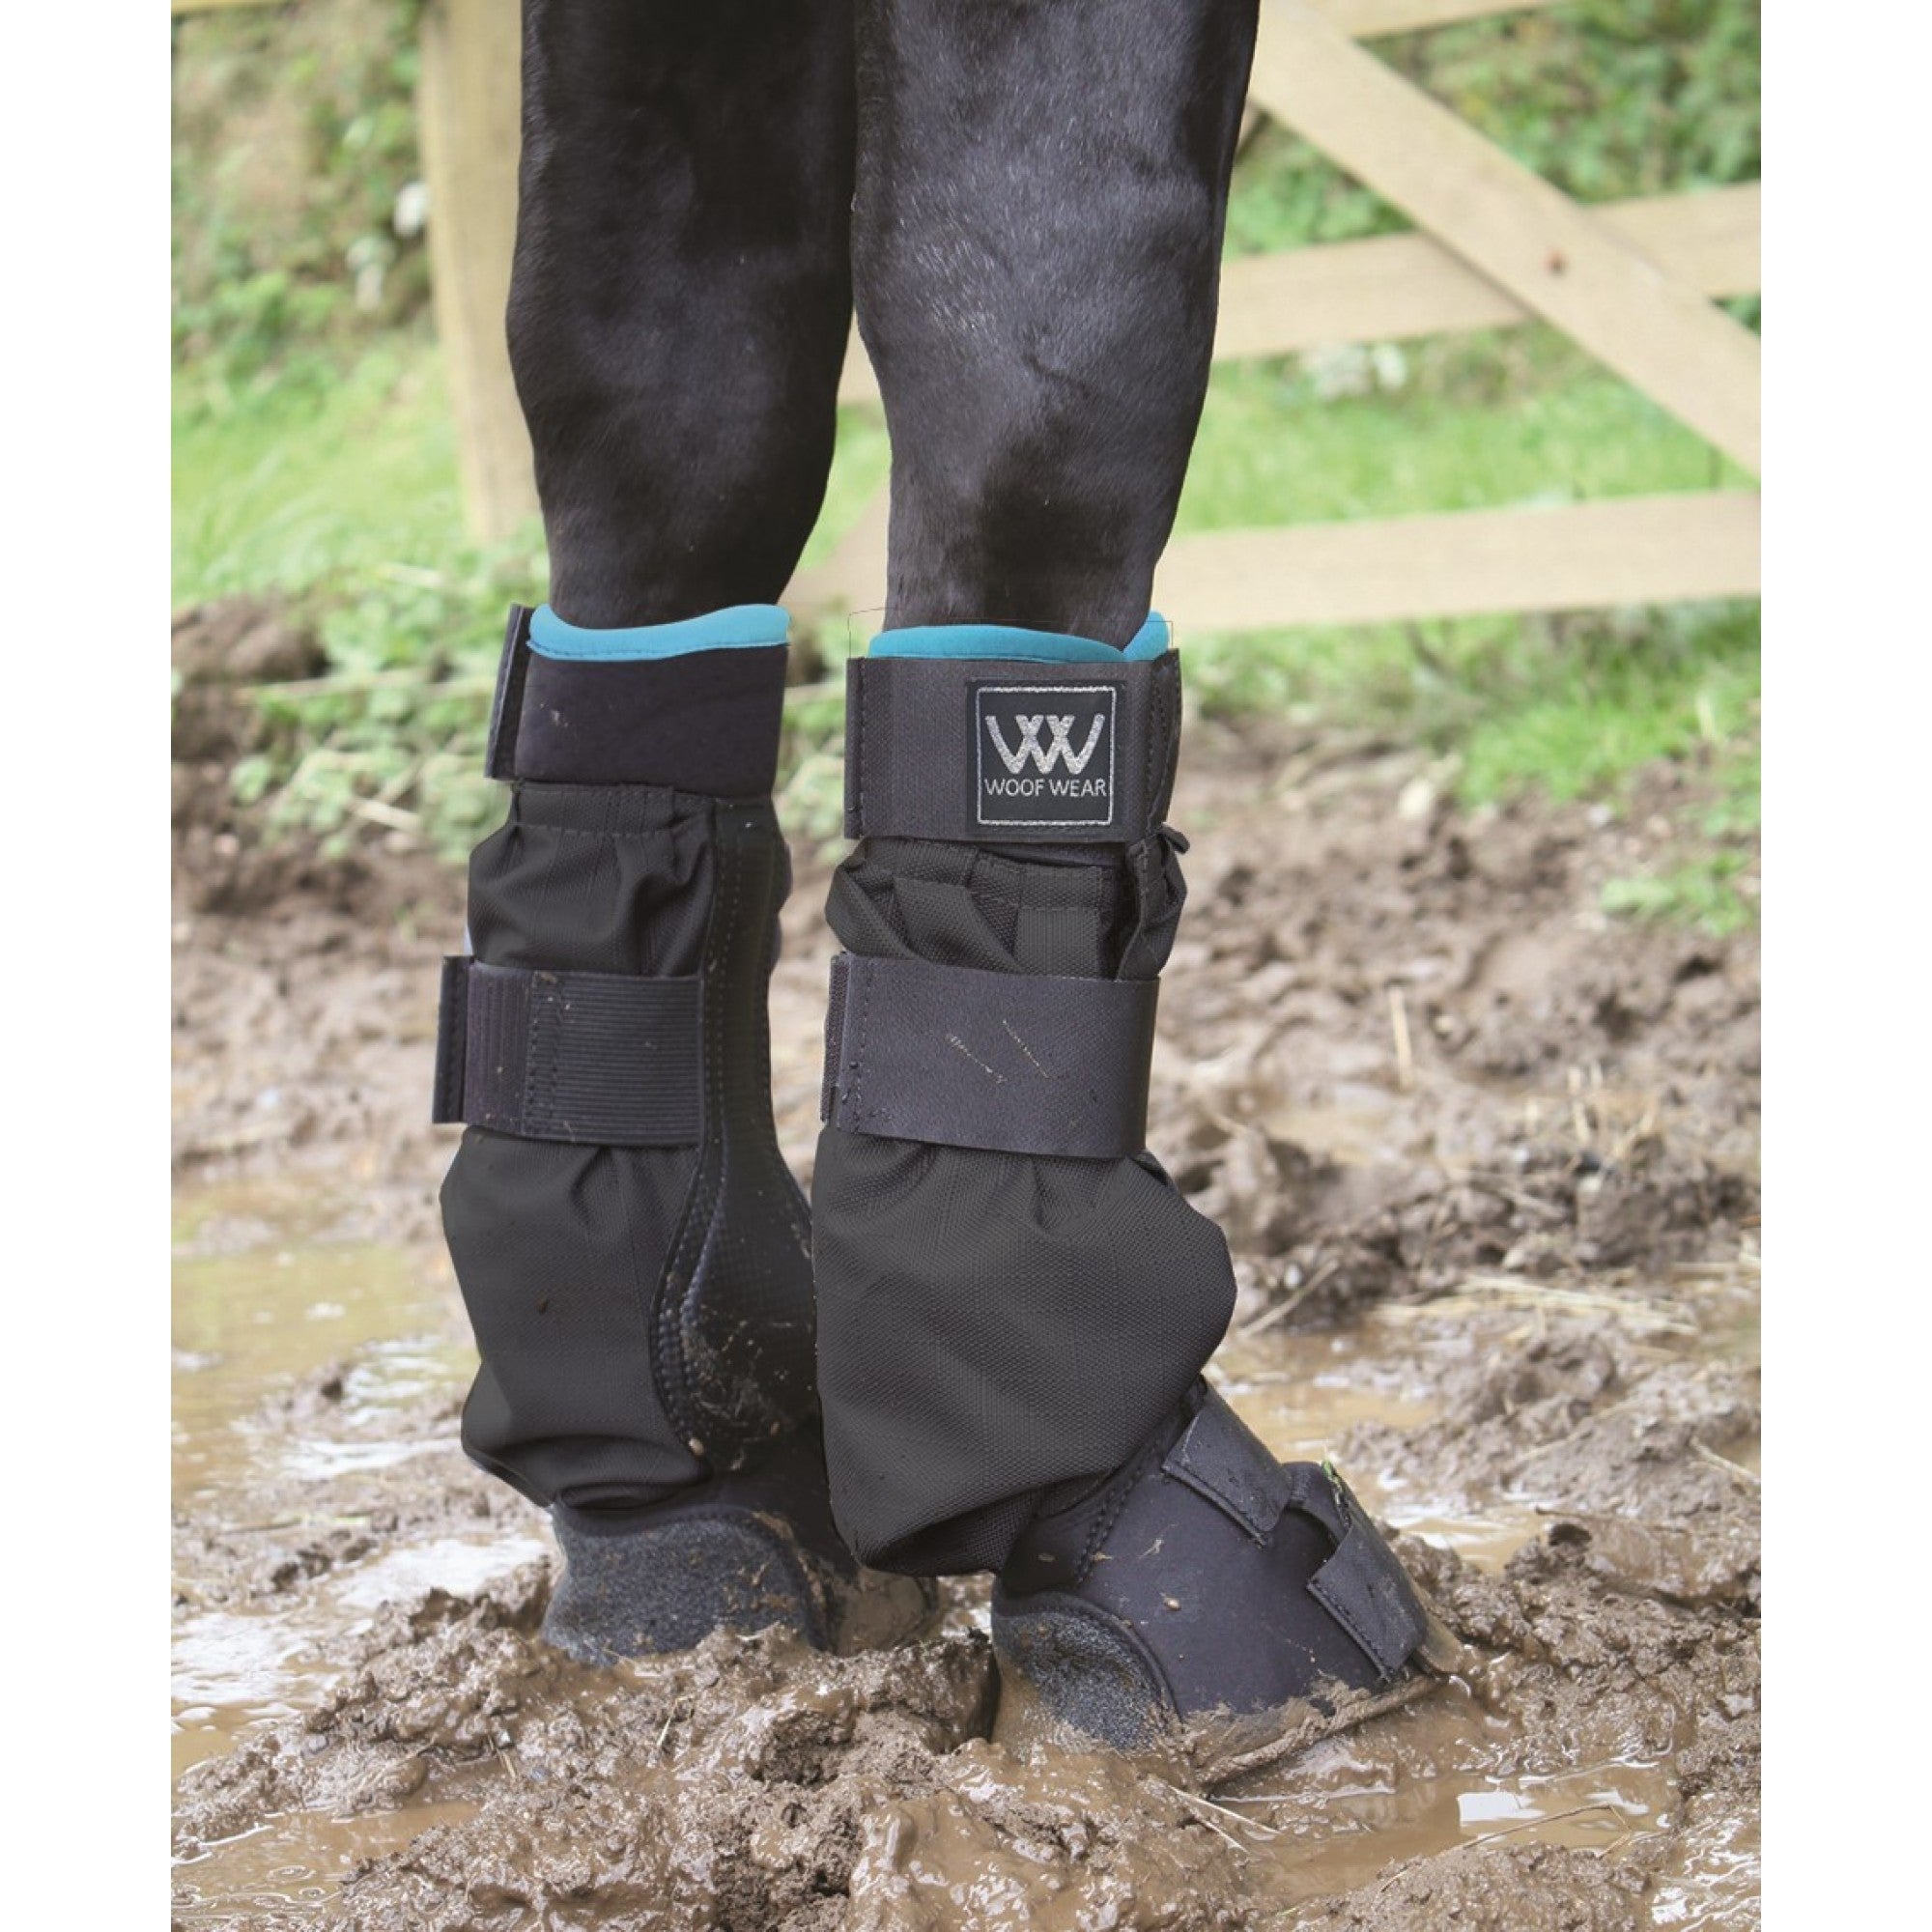 Woof Mud Fever Turnout Boots – Picov's Tack Shop